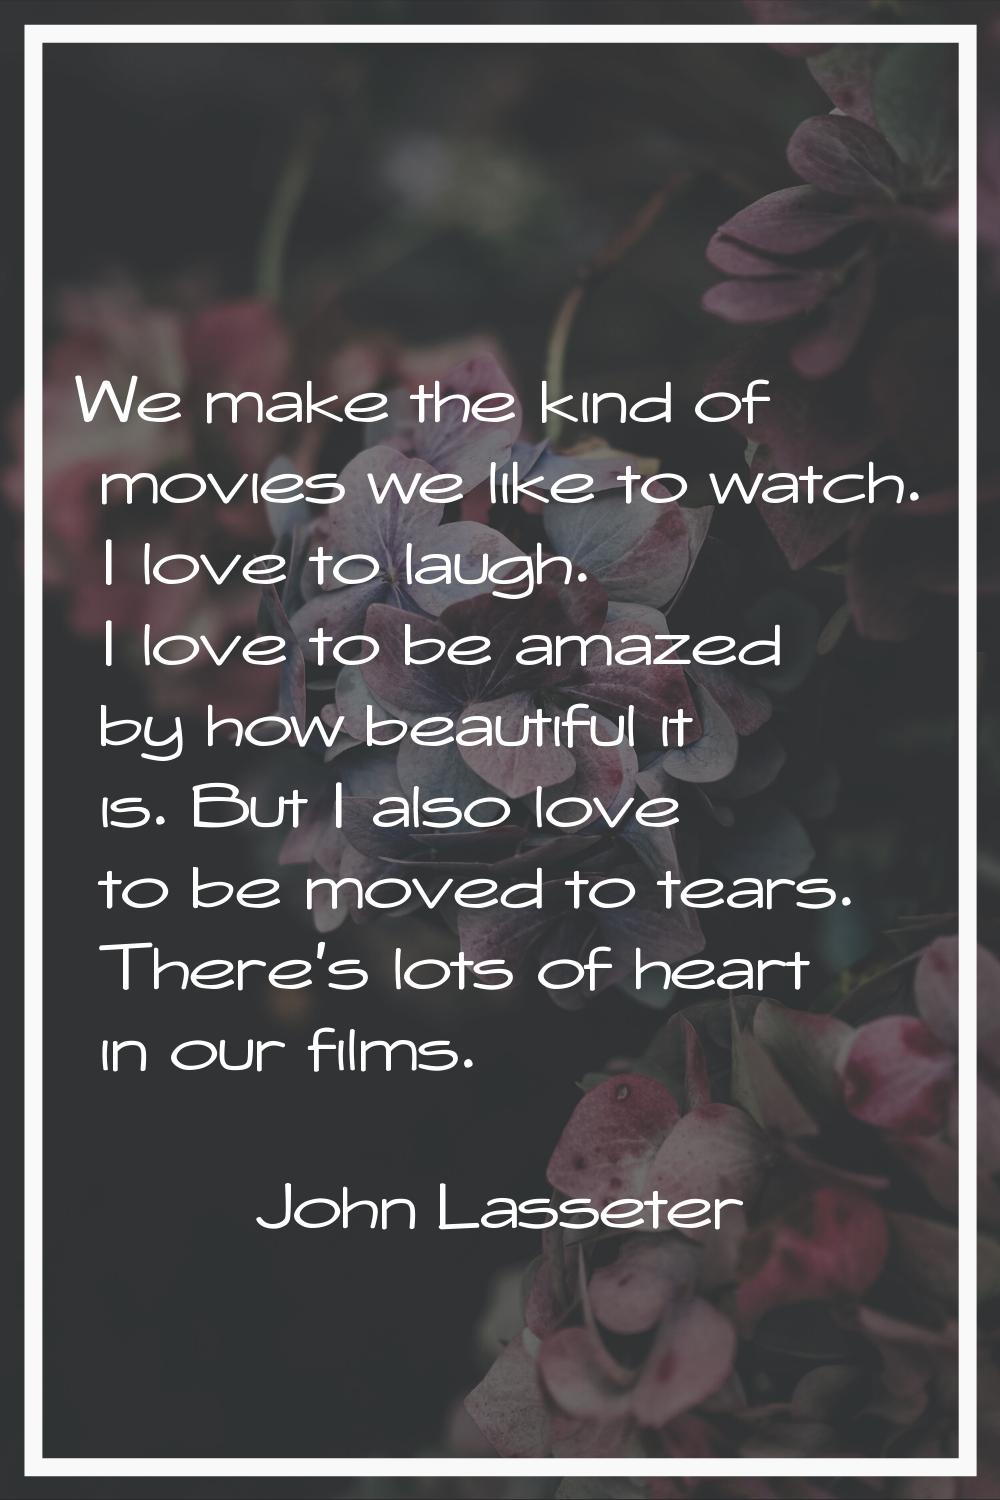 We make the kind of movies we like to watch. I love to laugh. I love to be amazed by how beautiful 